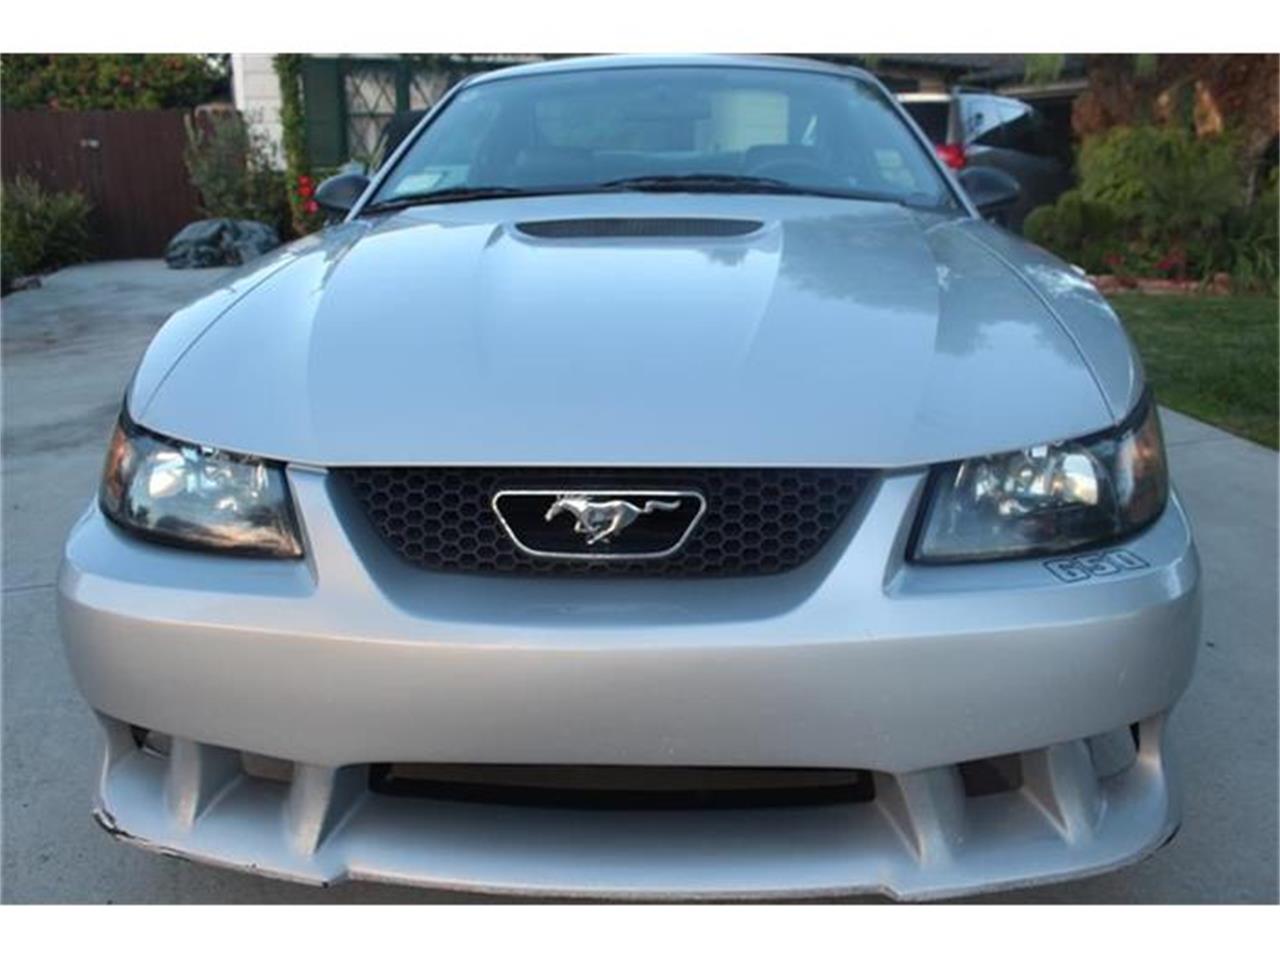 2000 Ford Mustang (Saleen) for sale in West Covina, CA – photo 16